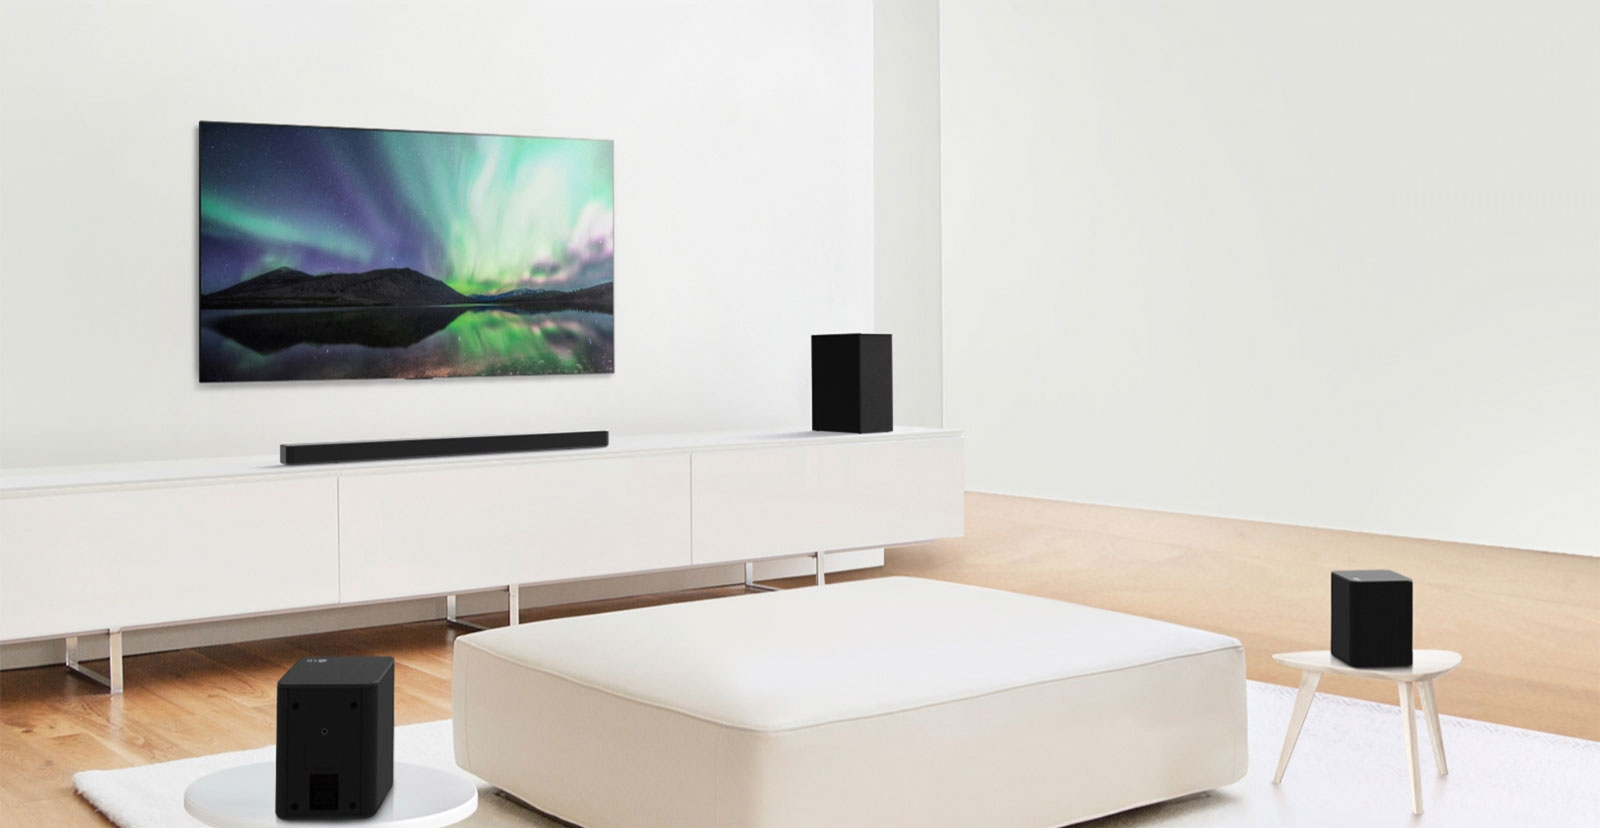 Video preview showing LG Soundbar in a white living room with 5.1 channel setup. 